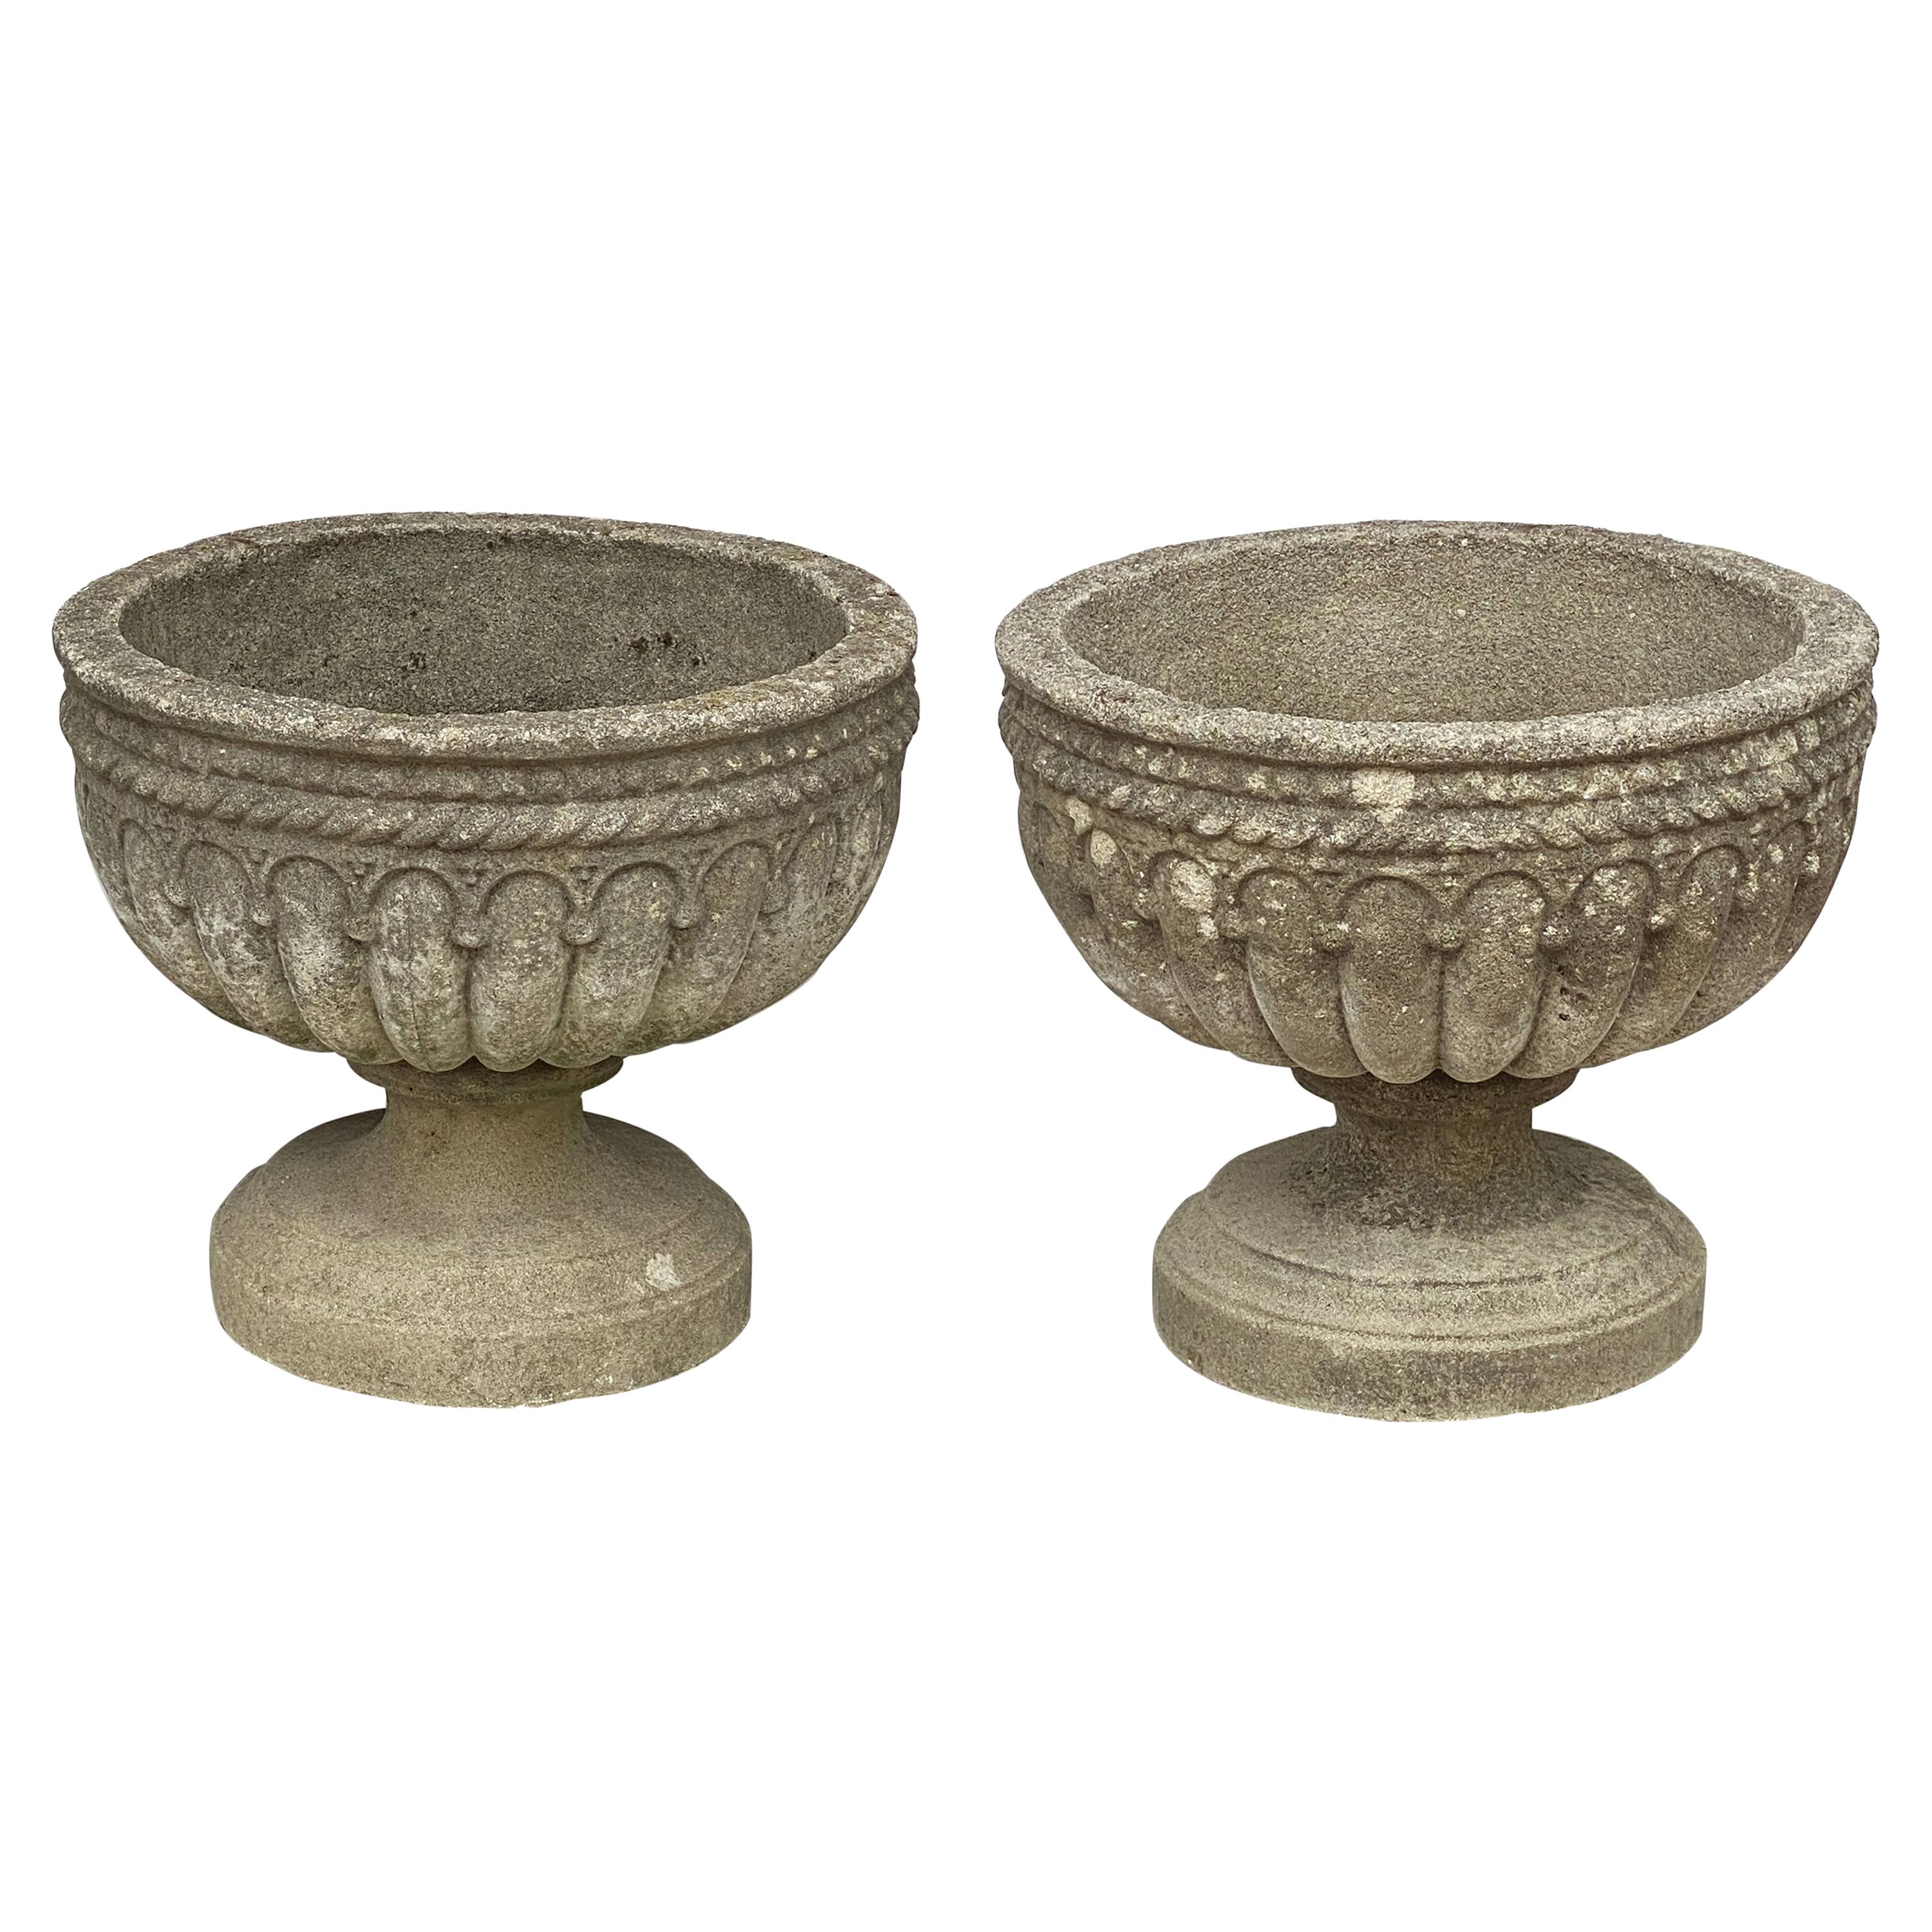 Pair of English Garden Stone Urns or Planters 'Individually Priced'